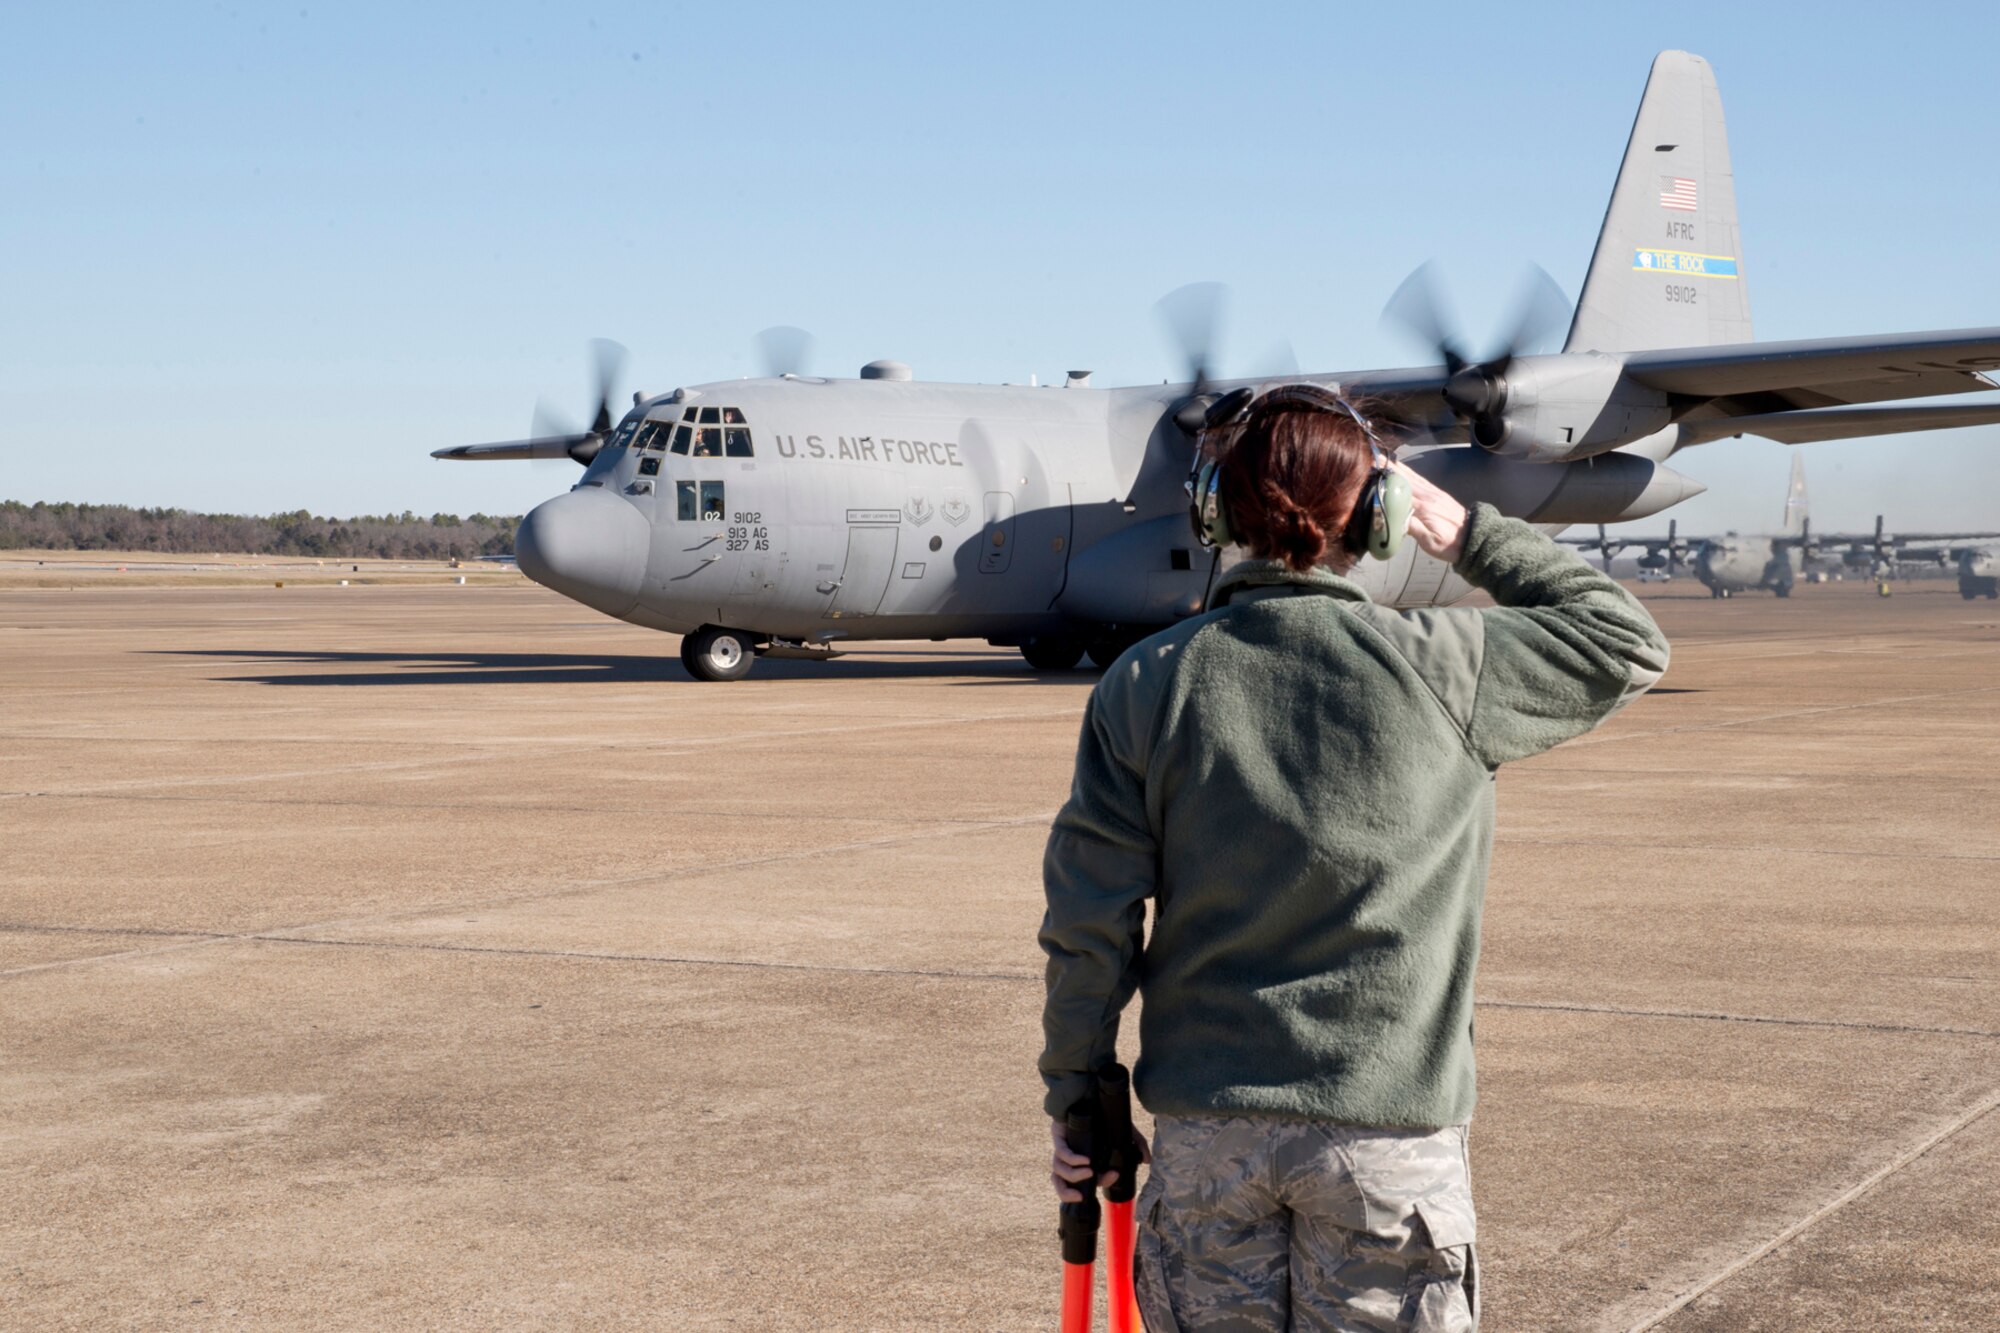 U.S. Air Force Reserve Master Sgt. Cathryn Rock, a dedicated crew chief assigned to the 913th Maintenance Squadron, salutes as her aircraft taxis to the runway for its last training mission takeoff from Little Rock Air Force Base, Ark., Jan. 28, 2016. The aircraft will be transferred to a new location, as part of the group’s transition from the “H” model to the “J” model. (U.S. Air Force photo by Master Sgt. Jeff Walston/Released)